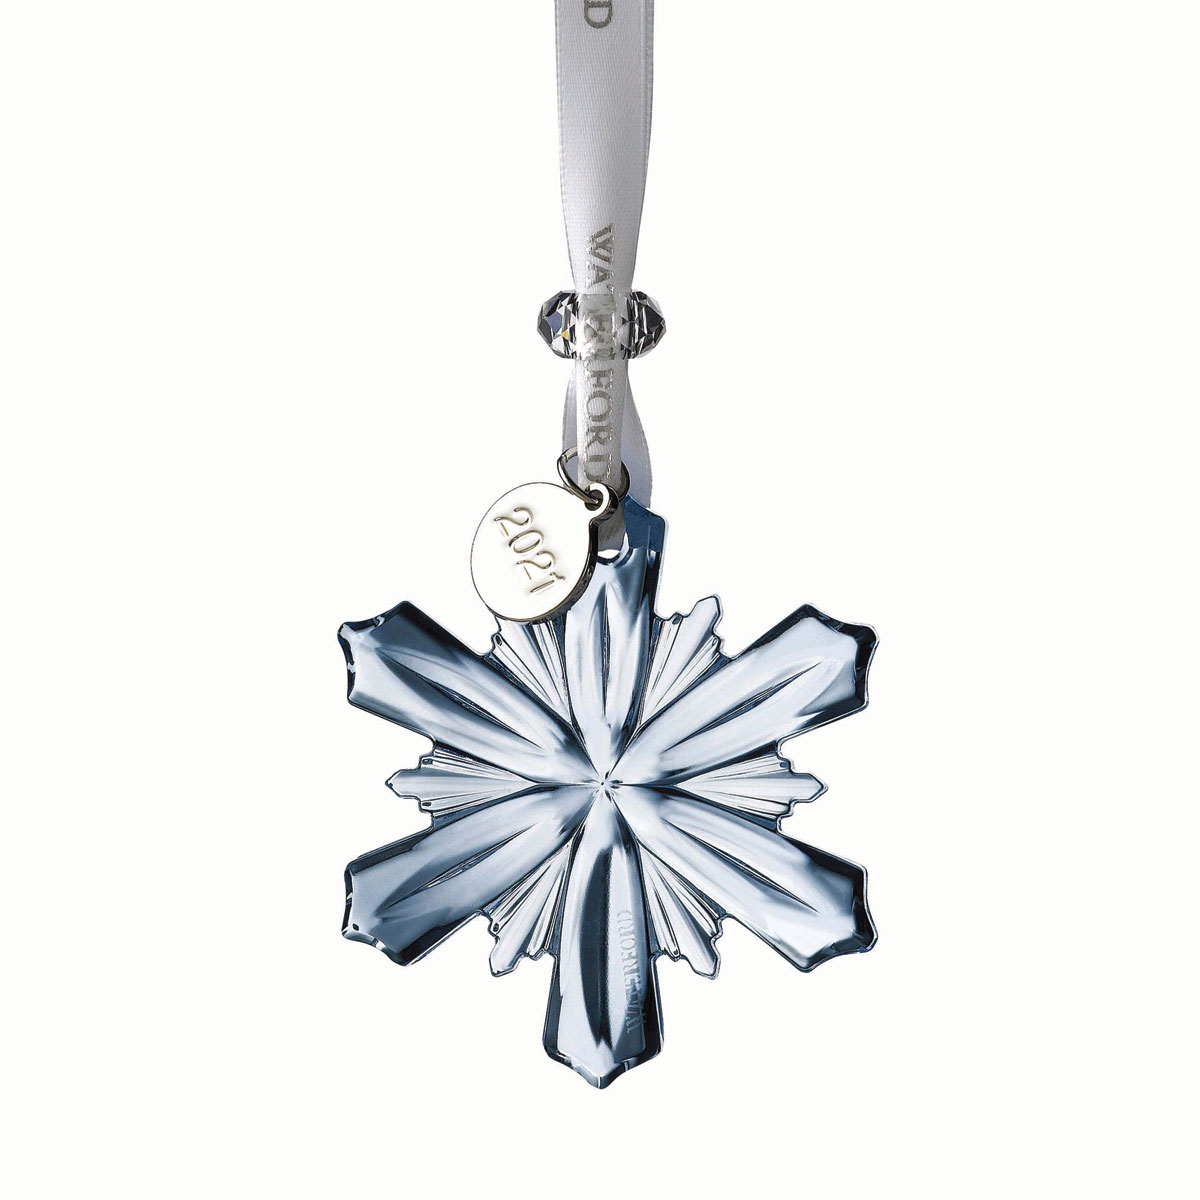 Waterford 2021 Topaz Ice Snowflake Dated Ornament